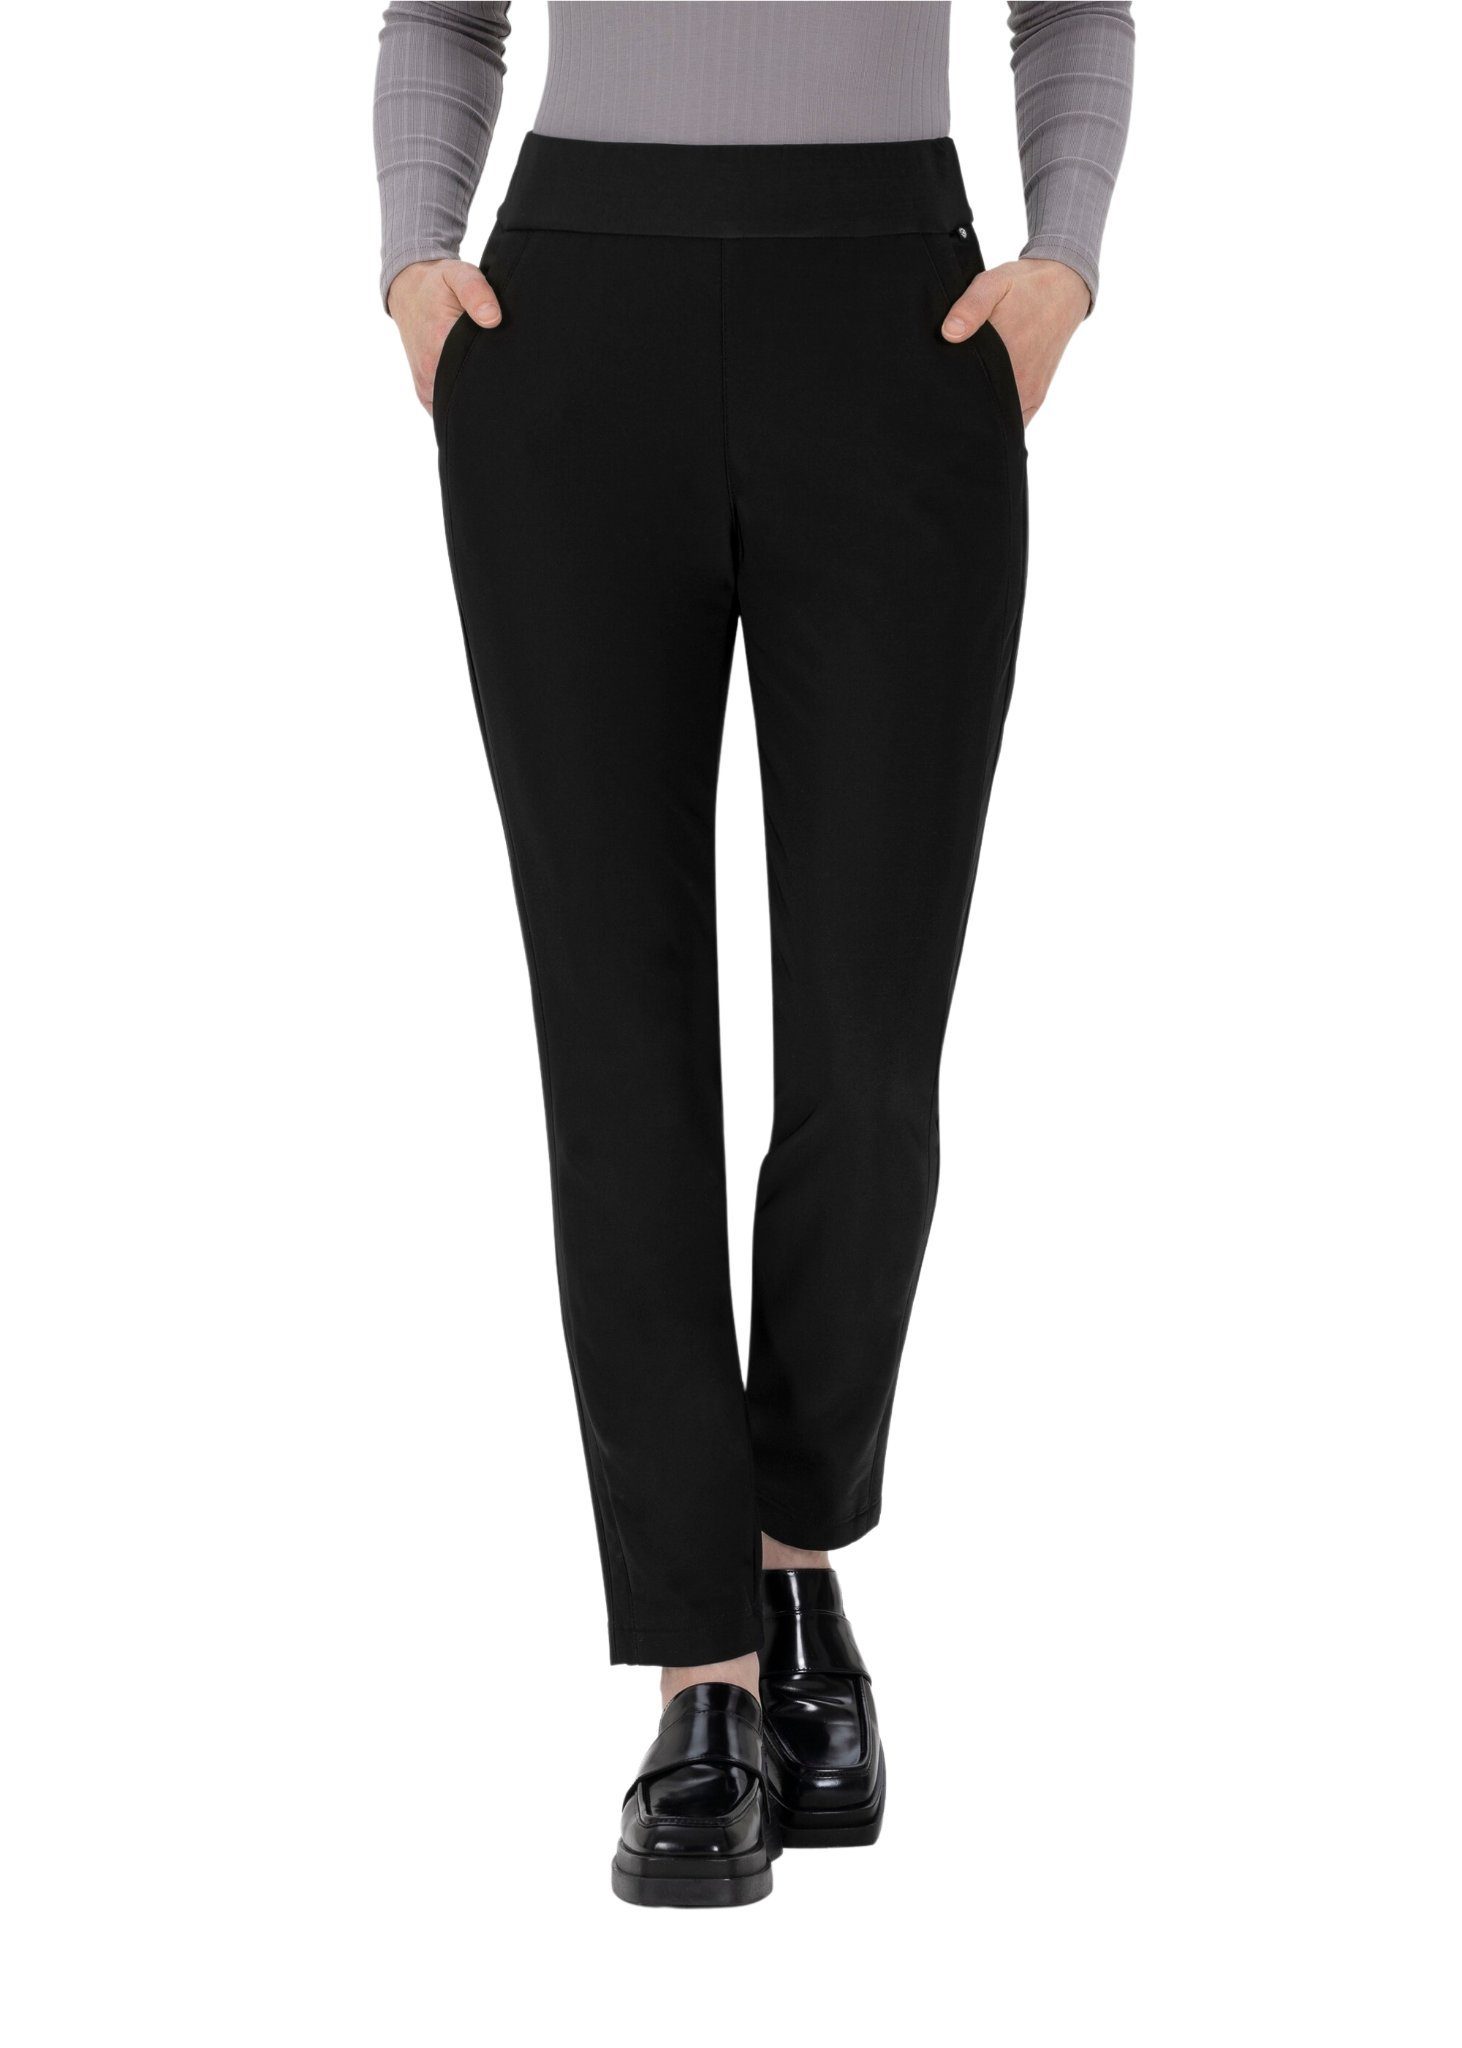 Perrie2-720 Jogpants Stehmann weiche Thermohose Thermo innen angeraut